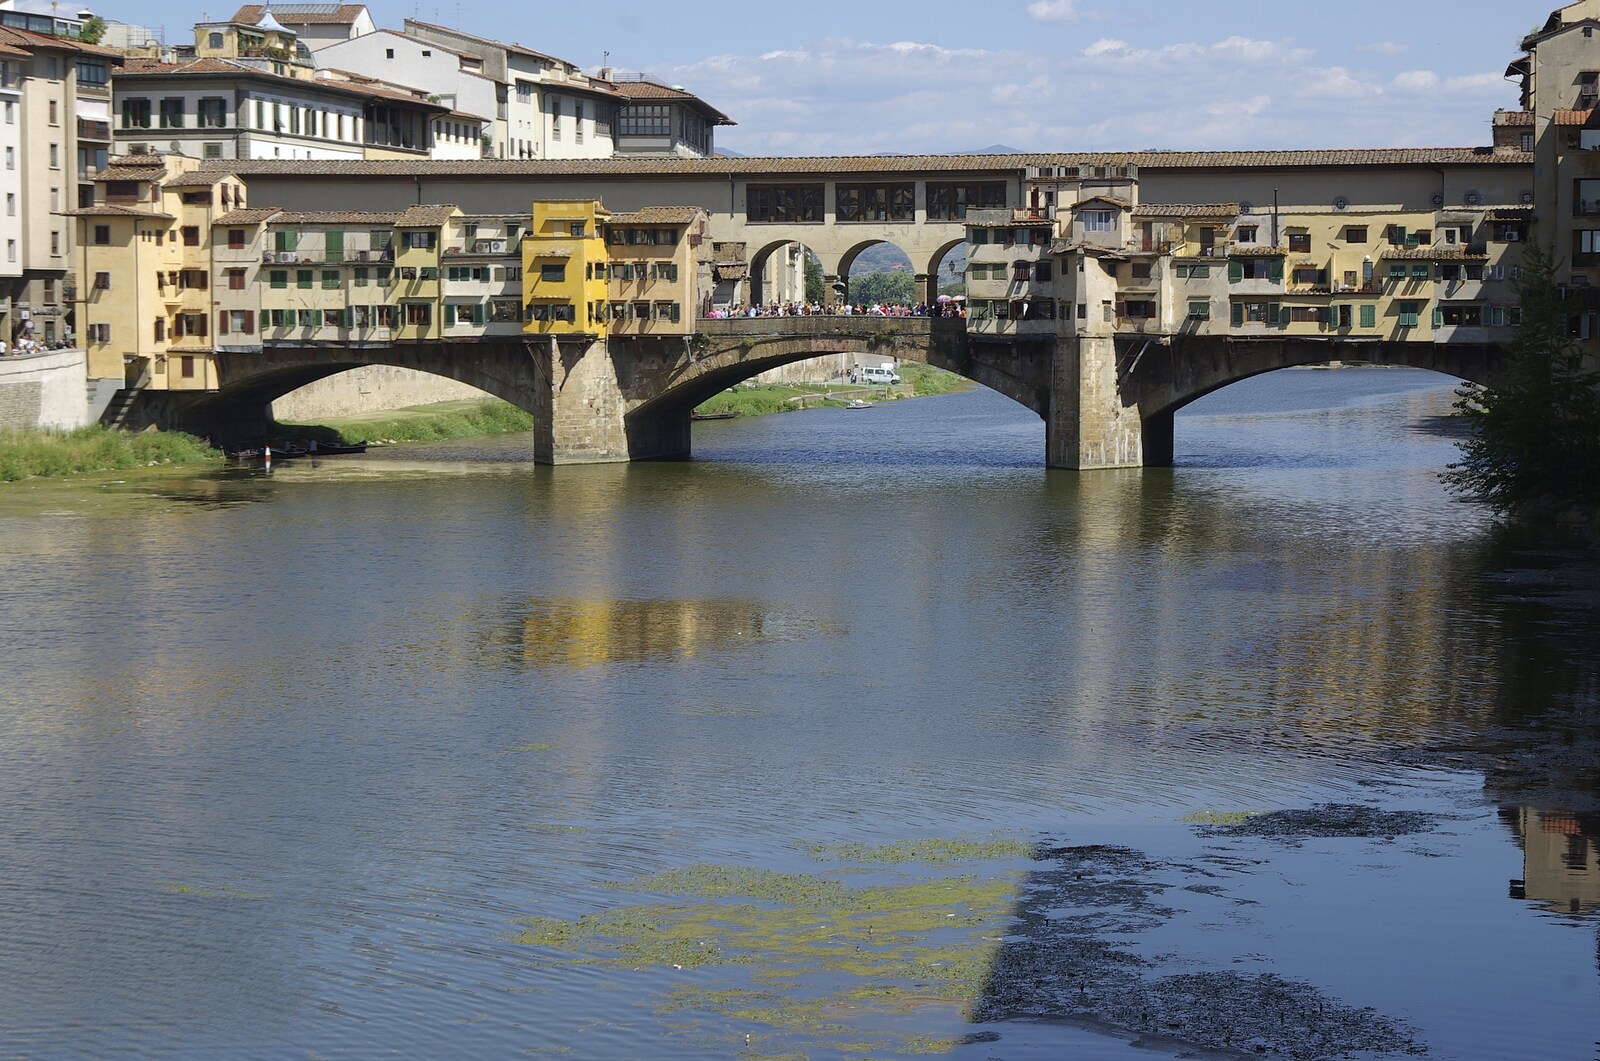 The Ponte Vechhia, from a nearby bridge from A Day Trip to Firenze, Tuscany, Italy - 24th July 2008